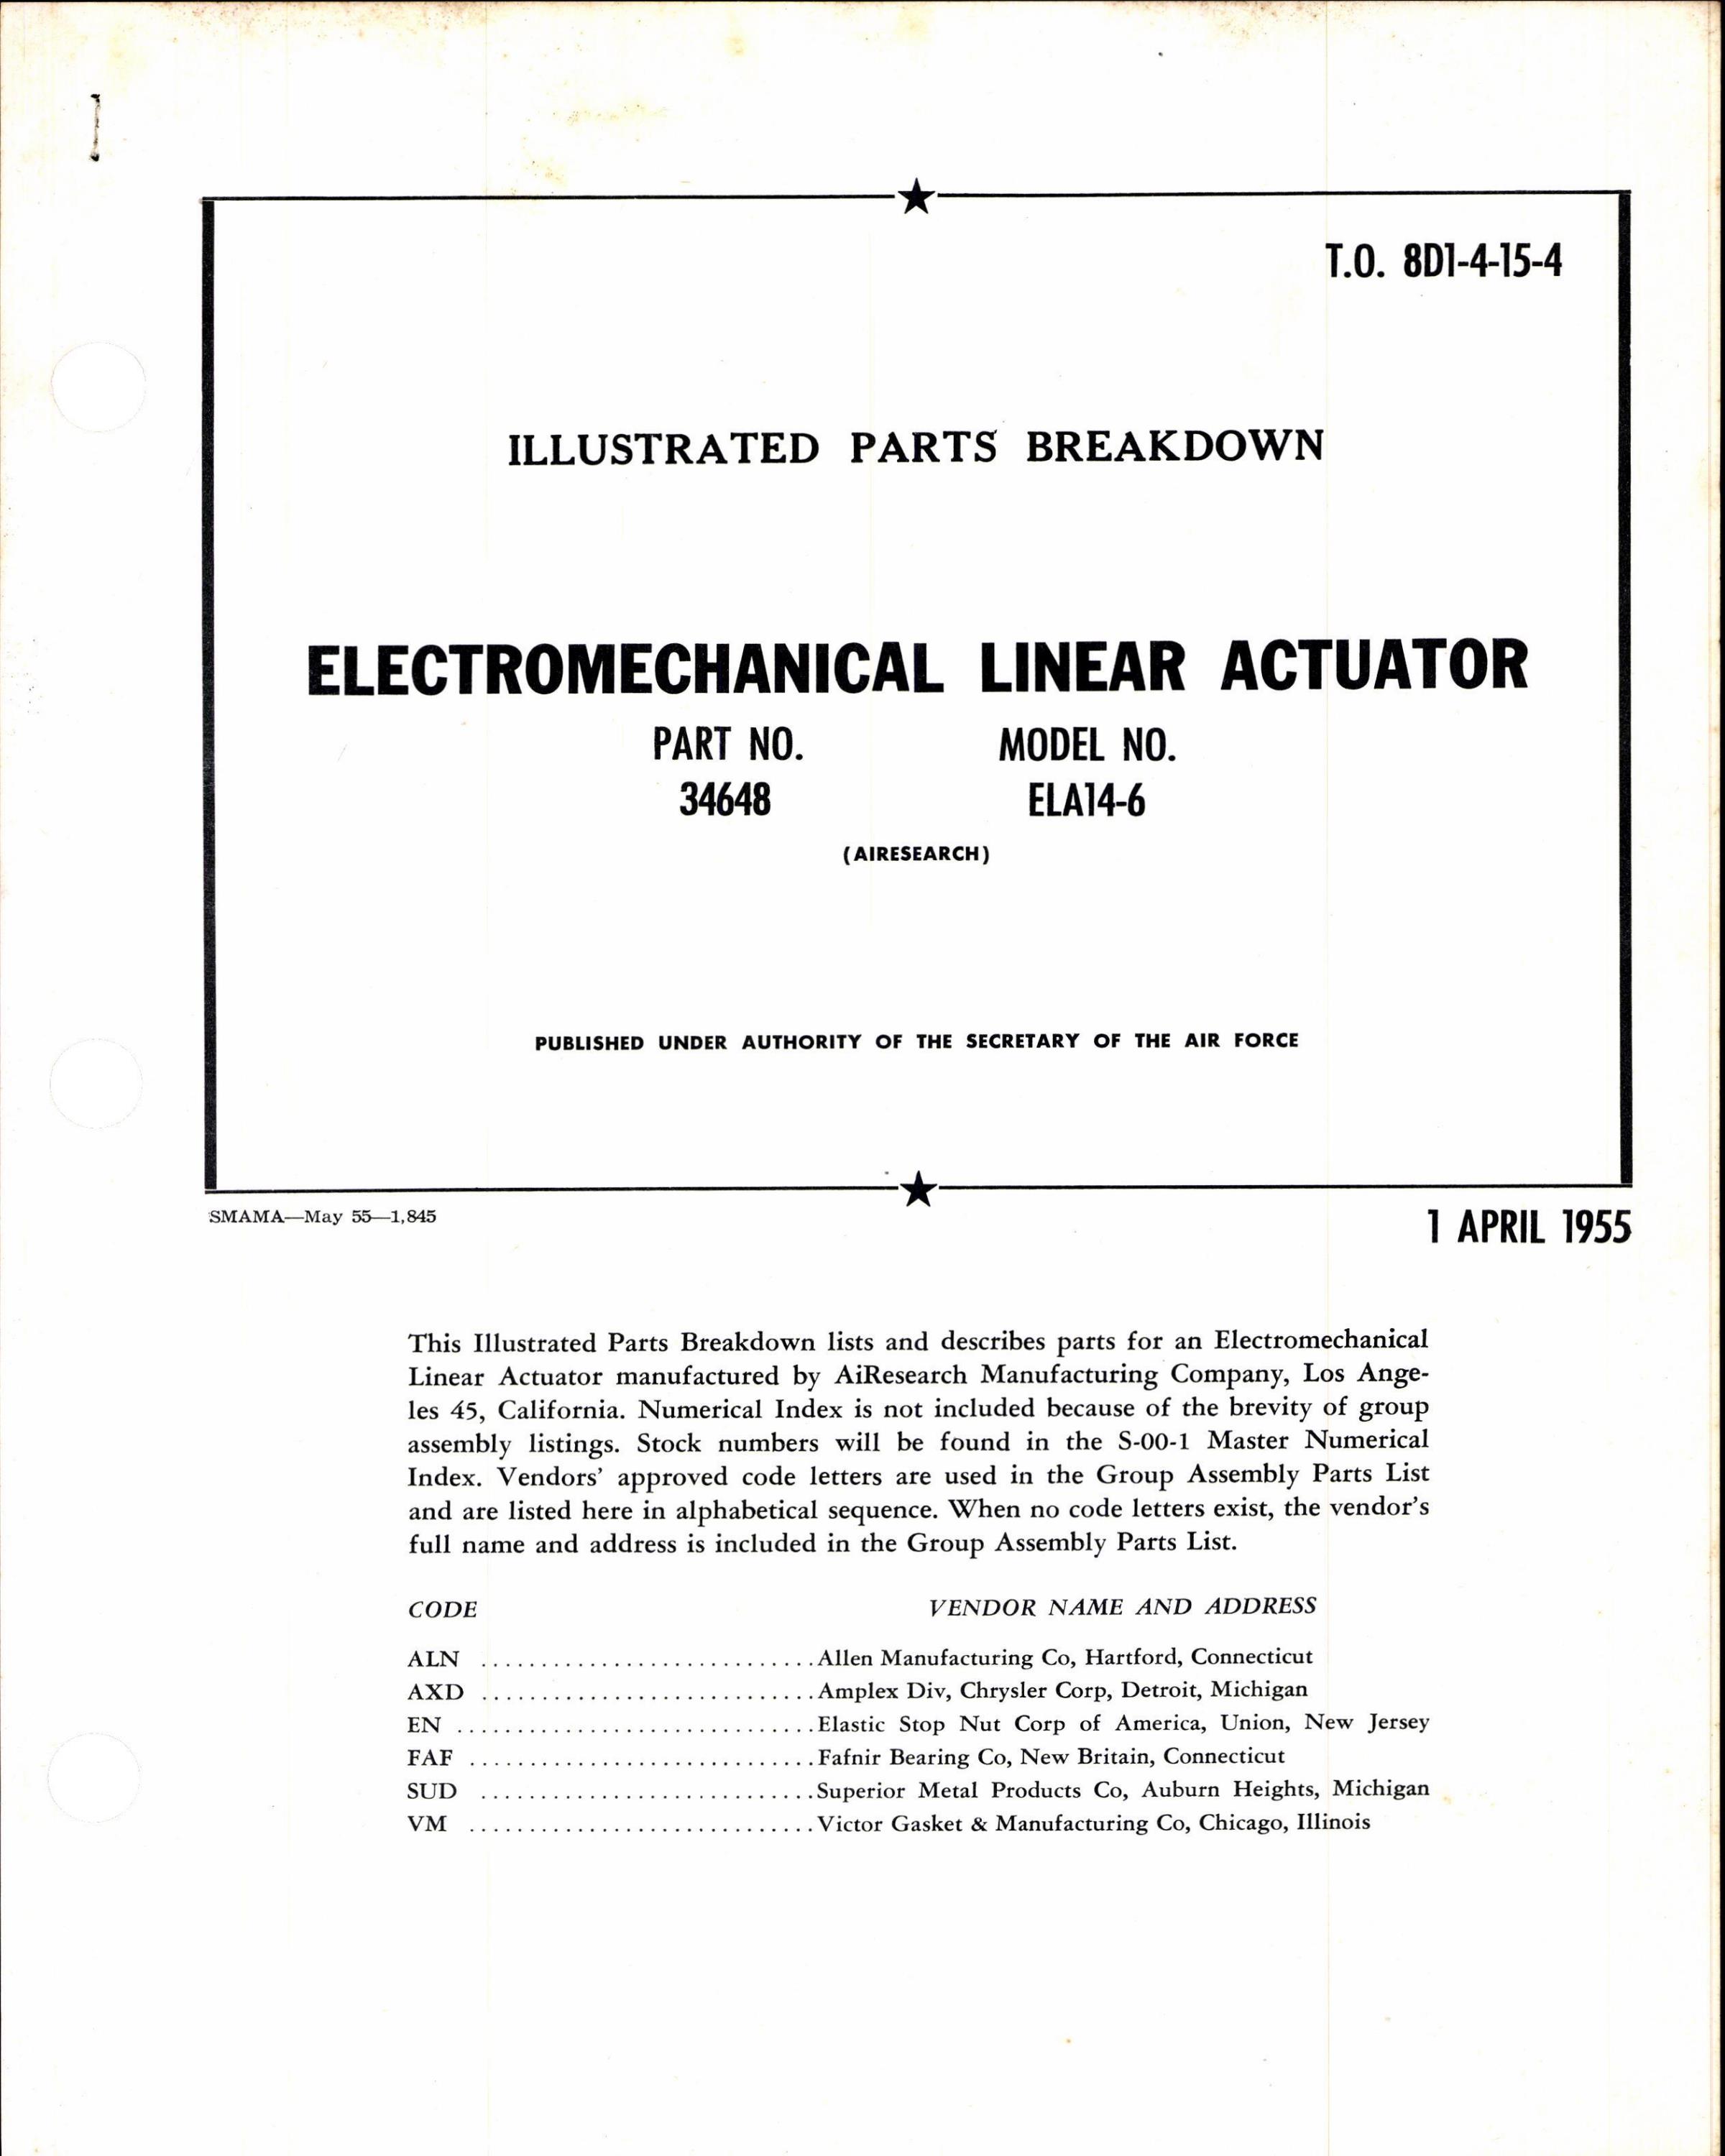 Sample page 1 from AirCorps Library document: Parts Breakdown for Electromechanical Linear Actuator